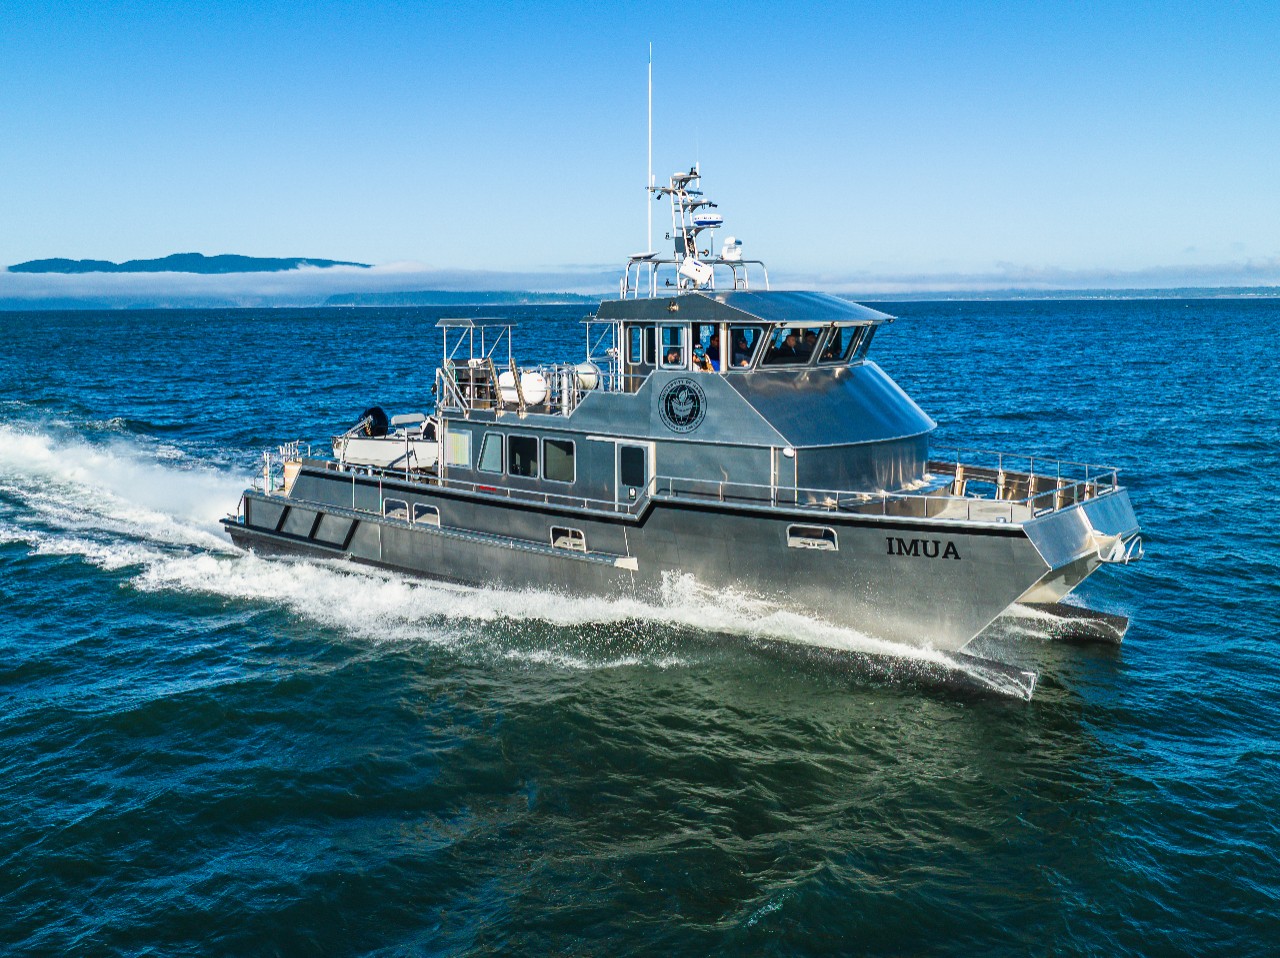 Scania V8 Engines Power New Research Vessel for The University of Hawai'i at Manoa